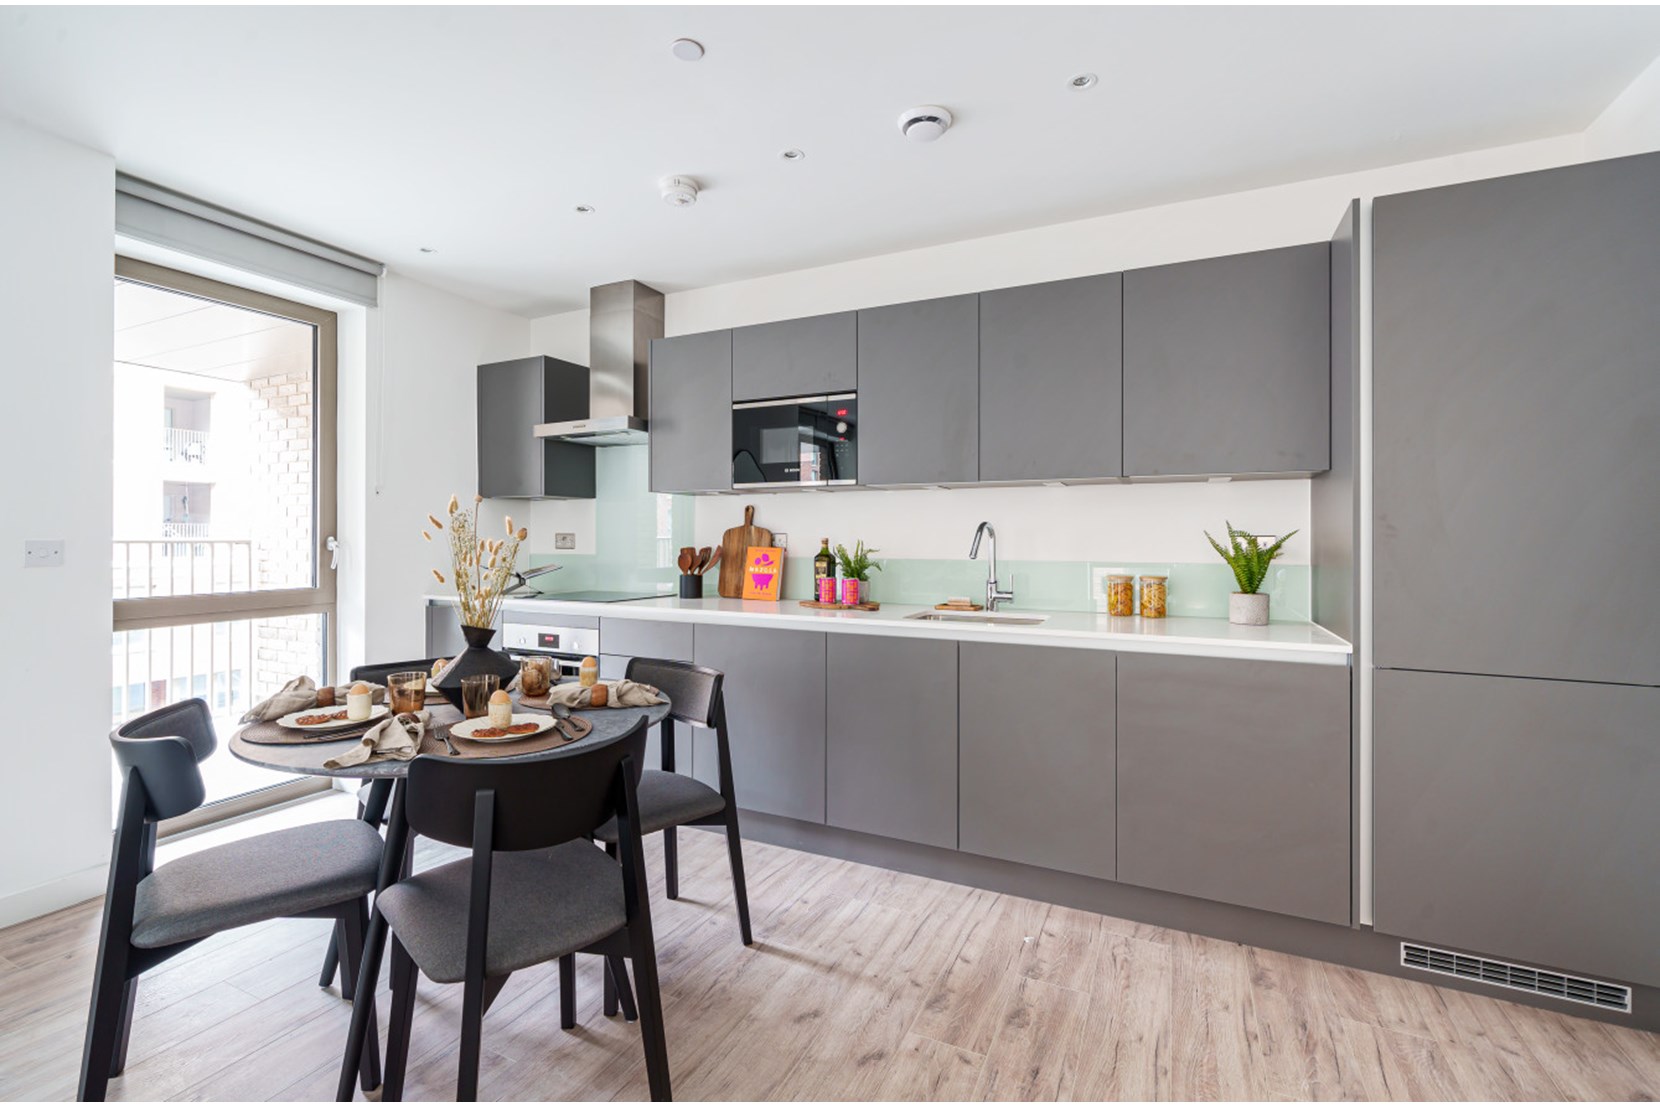 Apartments to Rent by Simple Life London in Anchor's Point, Royal Albert Dock, Newham, E16, kitchen dining area